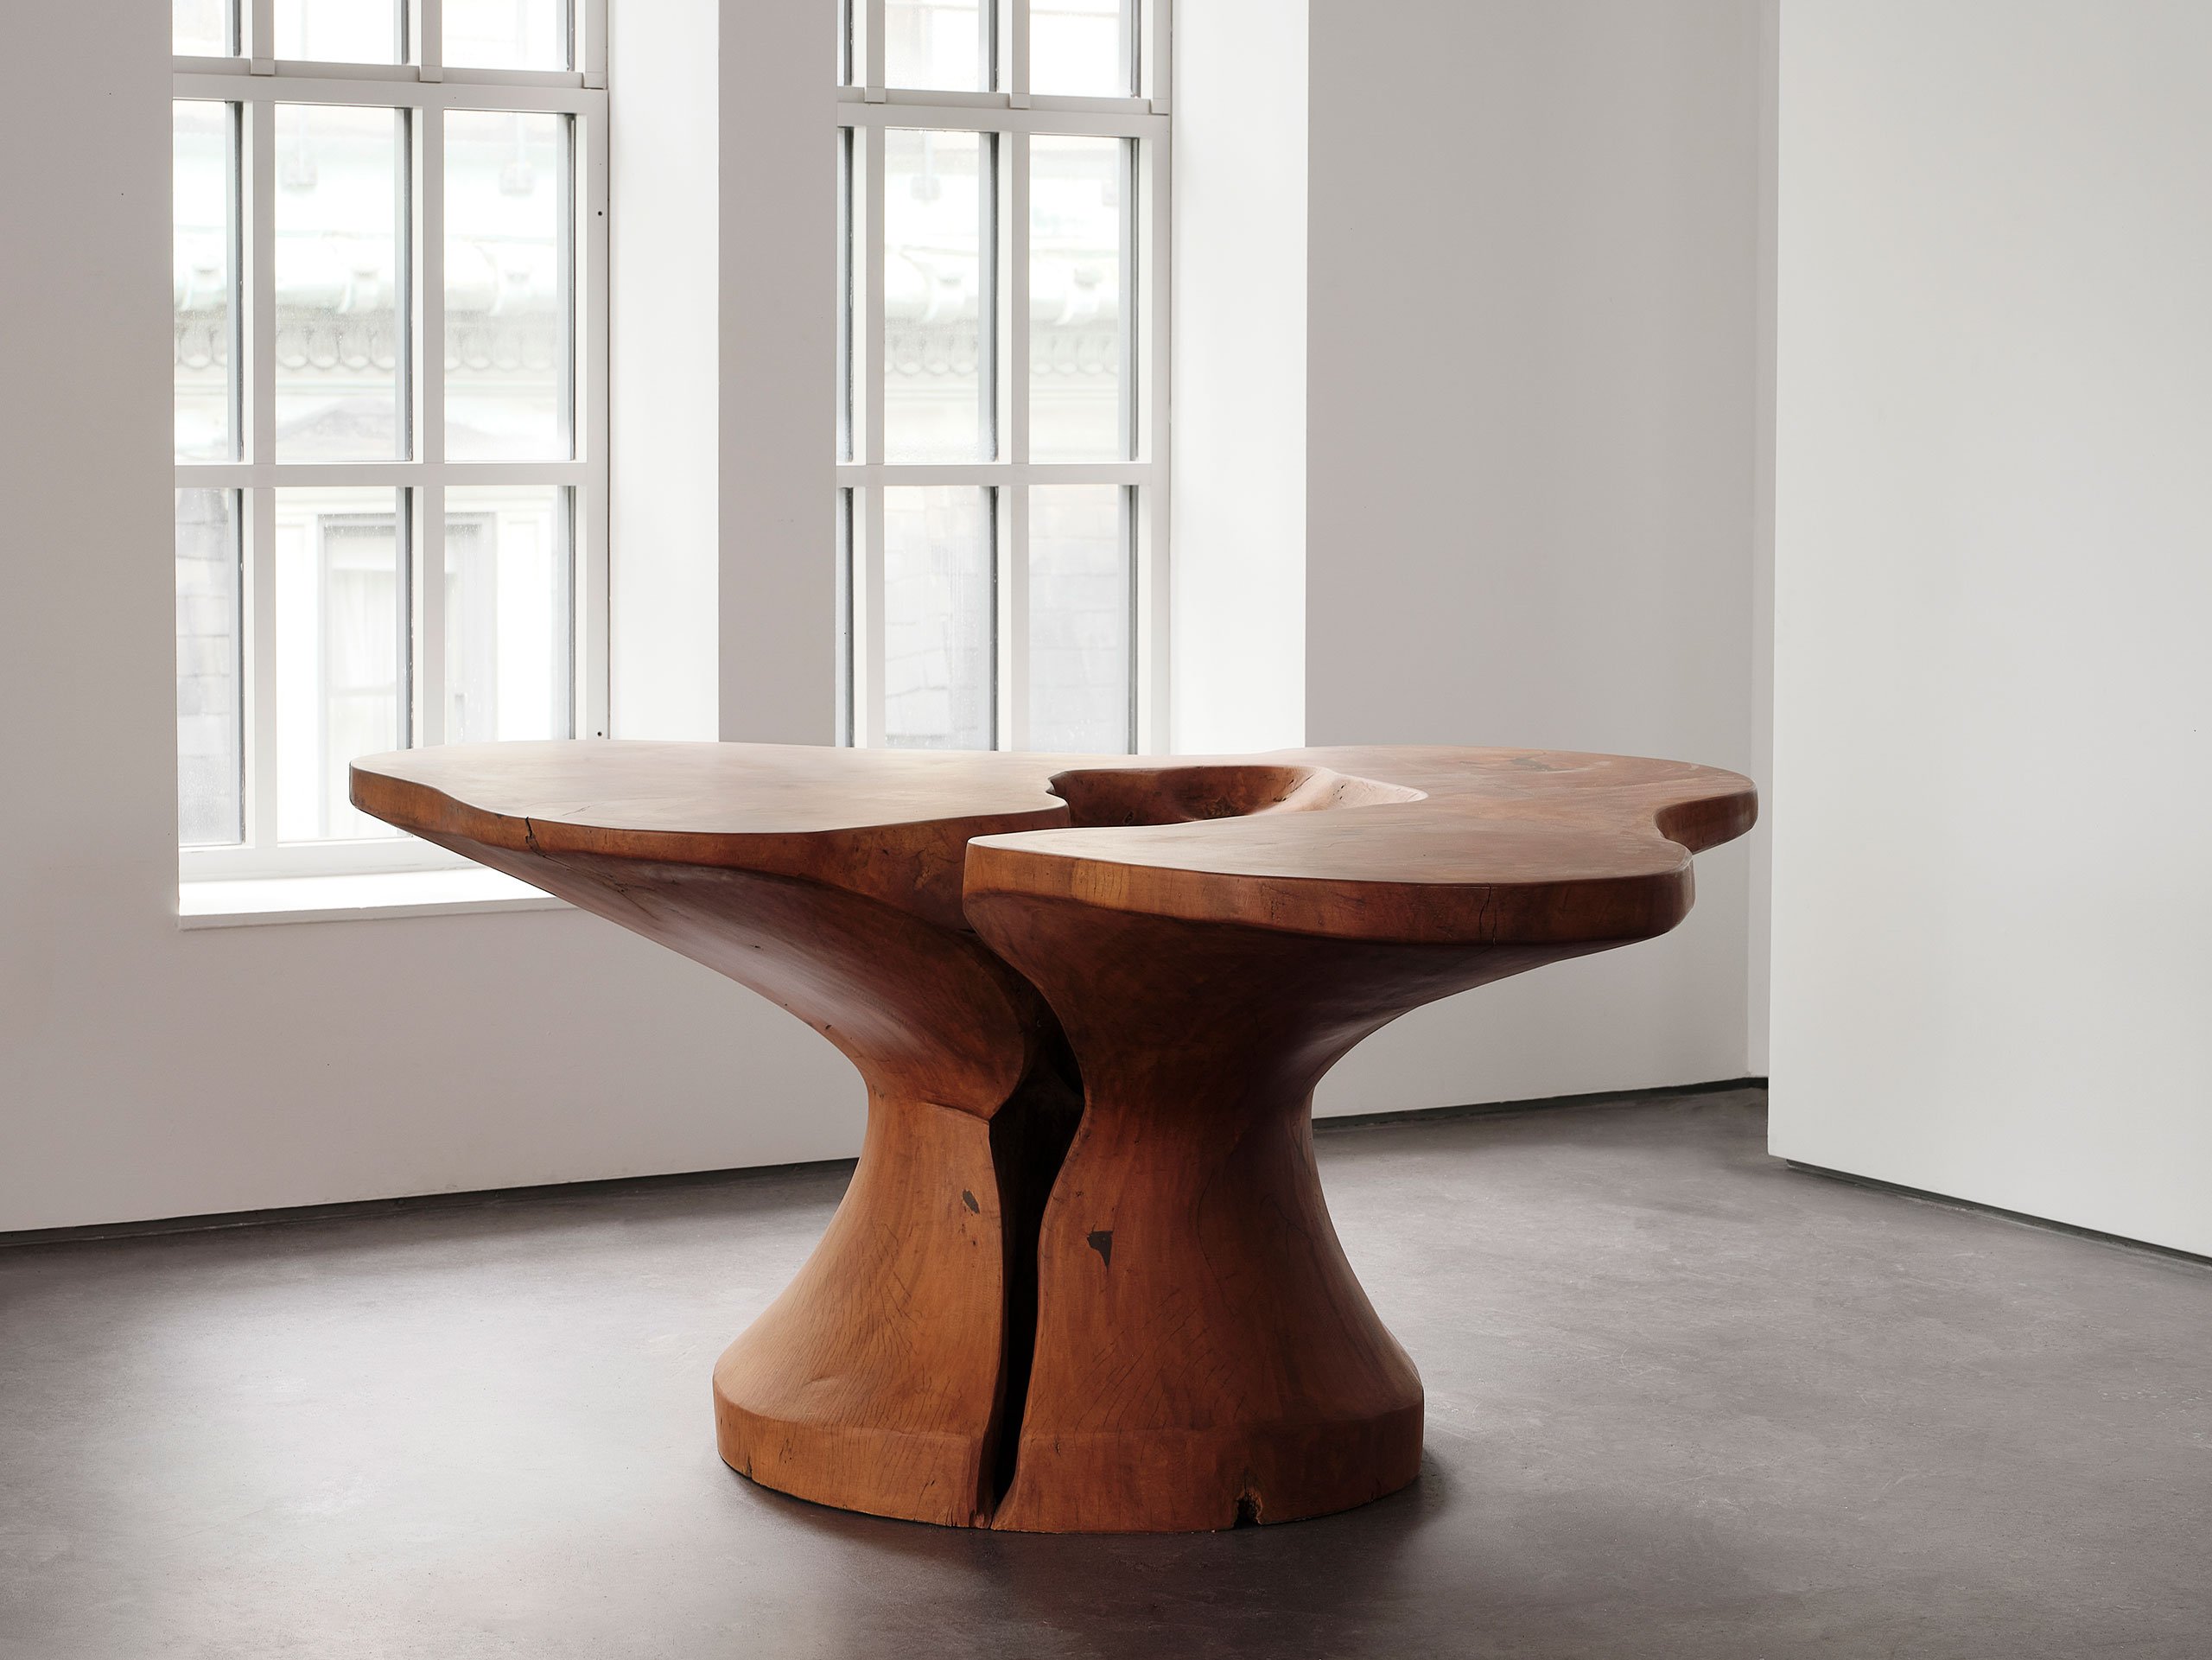 Dining Table by Zanine Caldas. Photography © Carpenters Workshop Gallery.